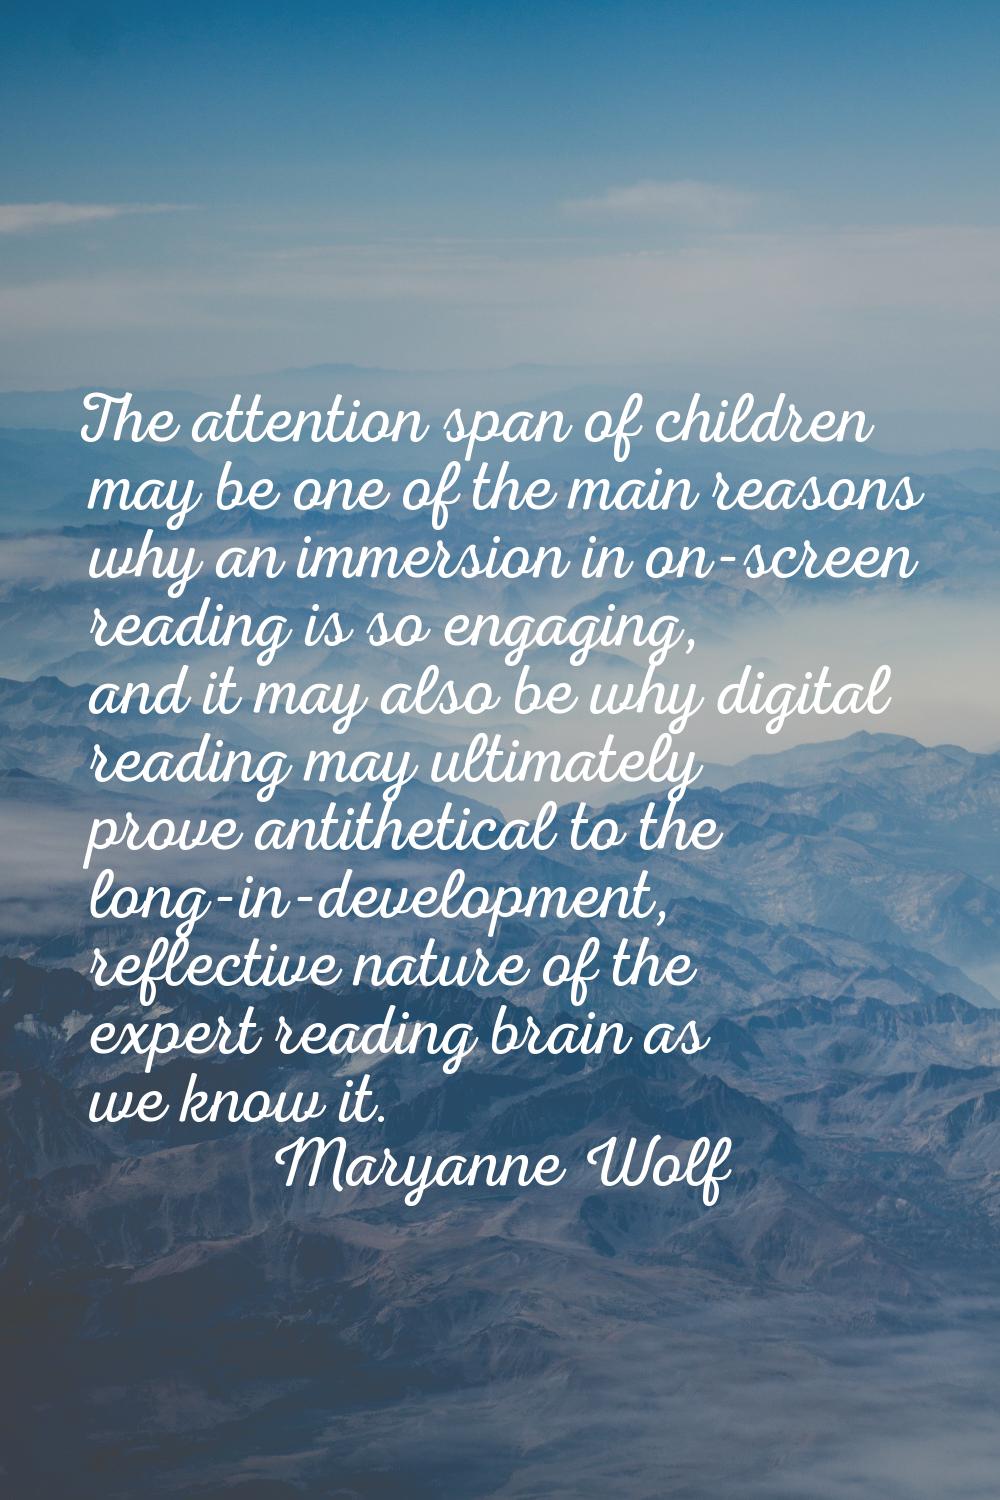 The attention span of children may be one of the main reasons why an immersion in on-screen reading